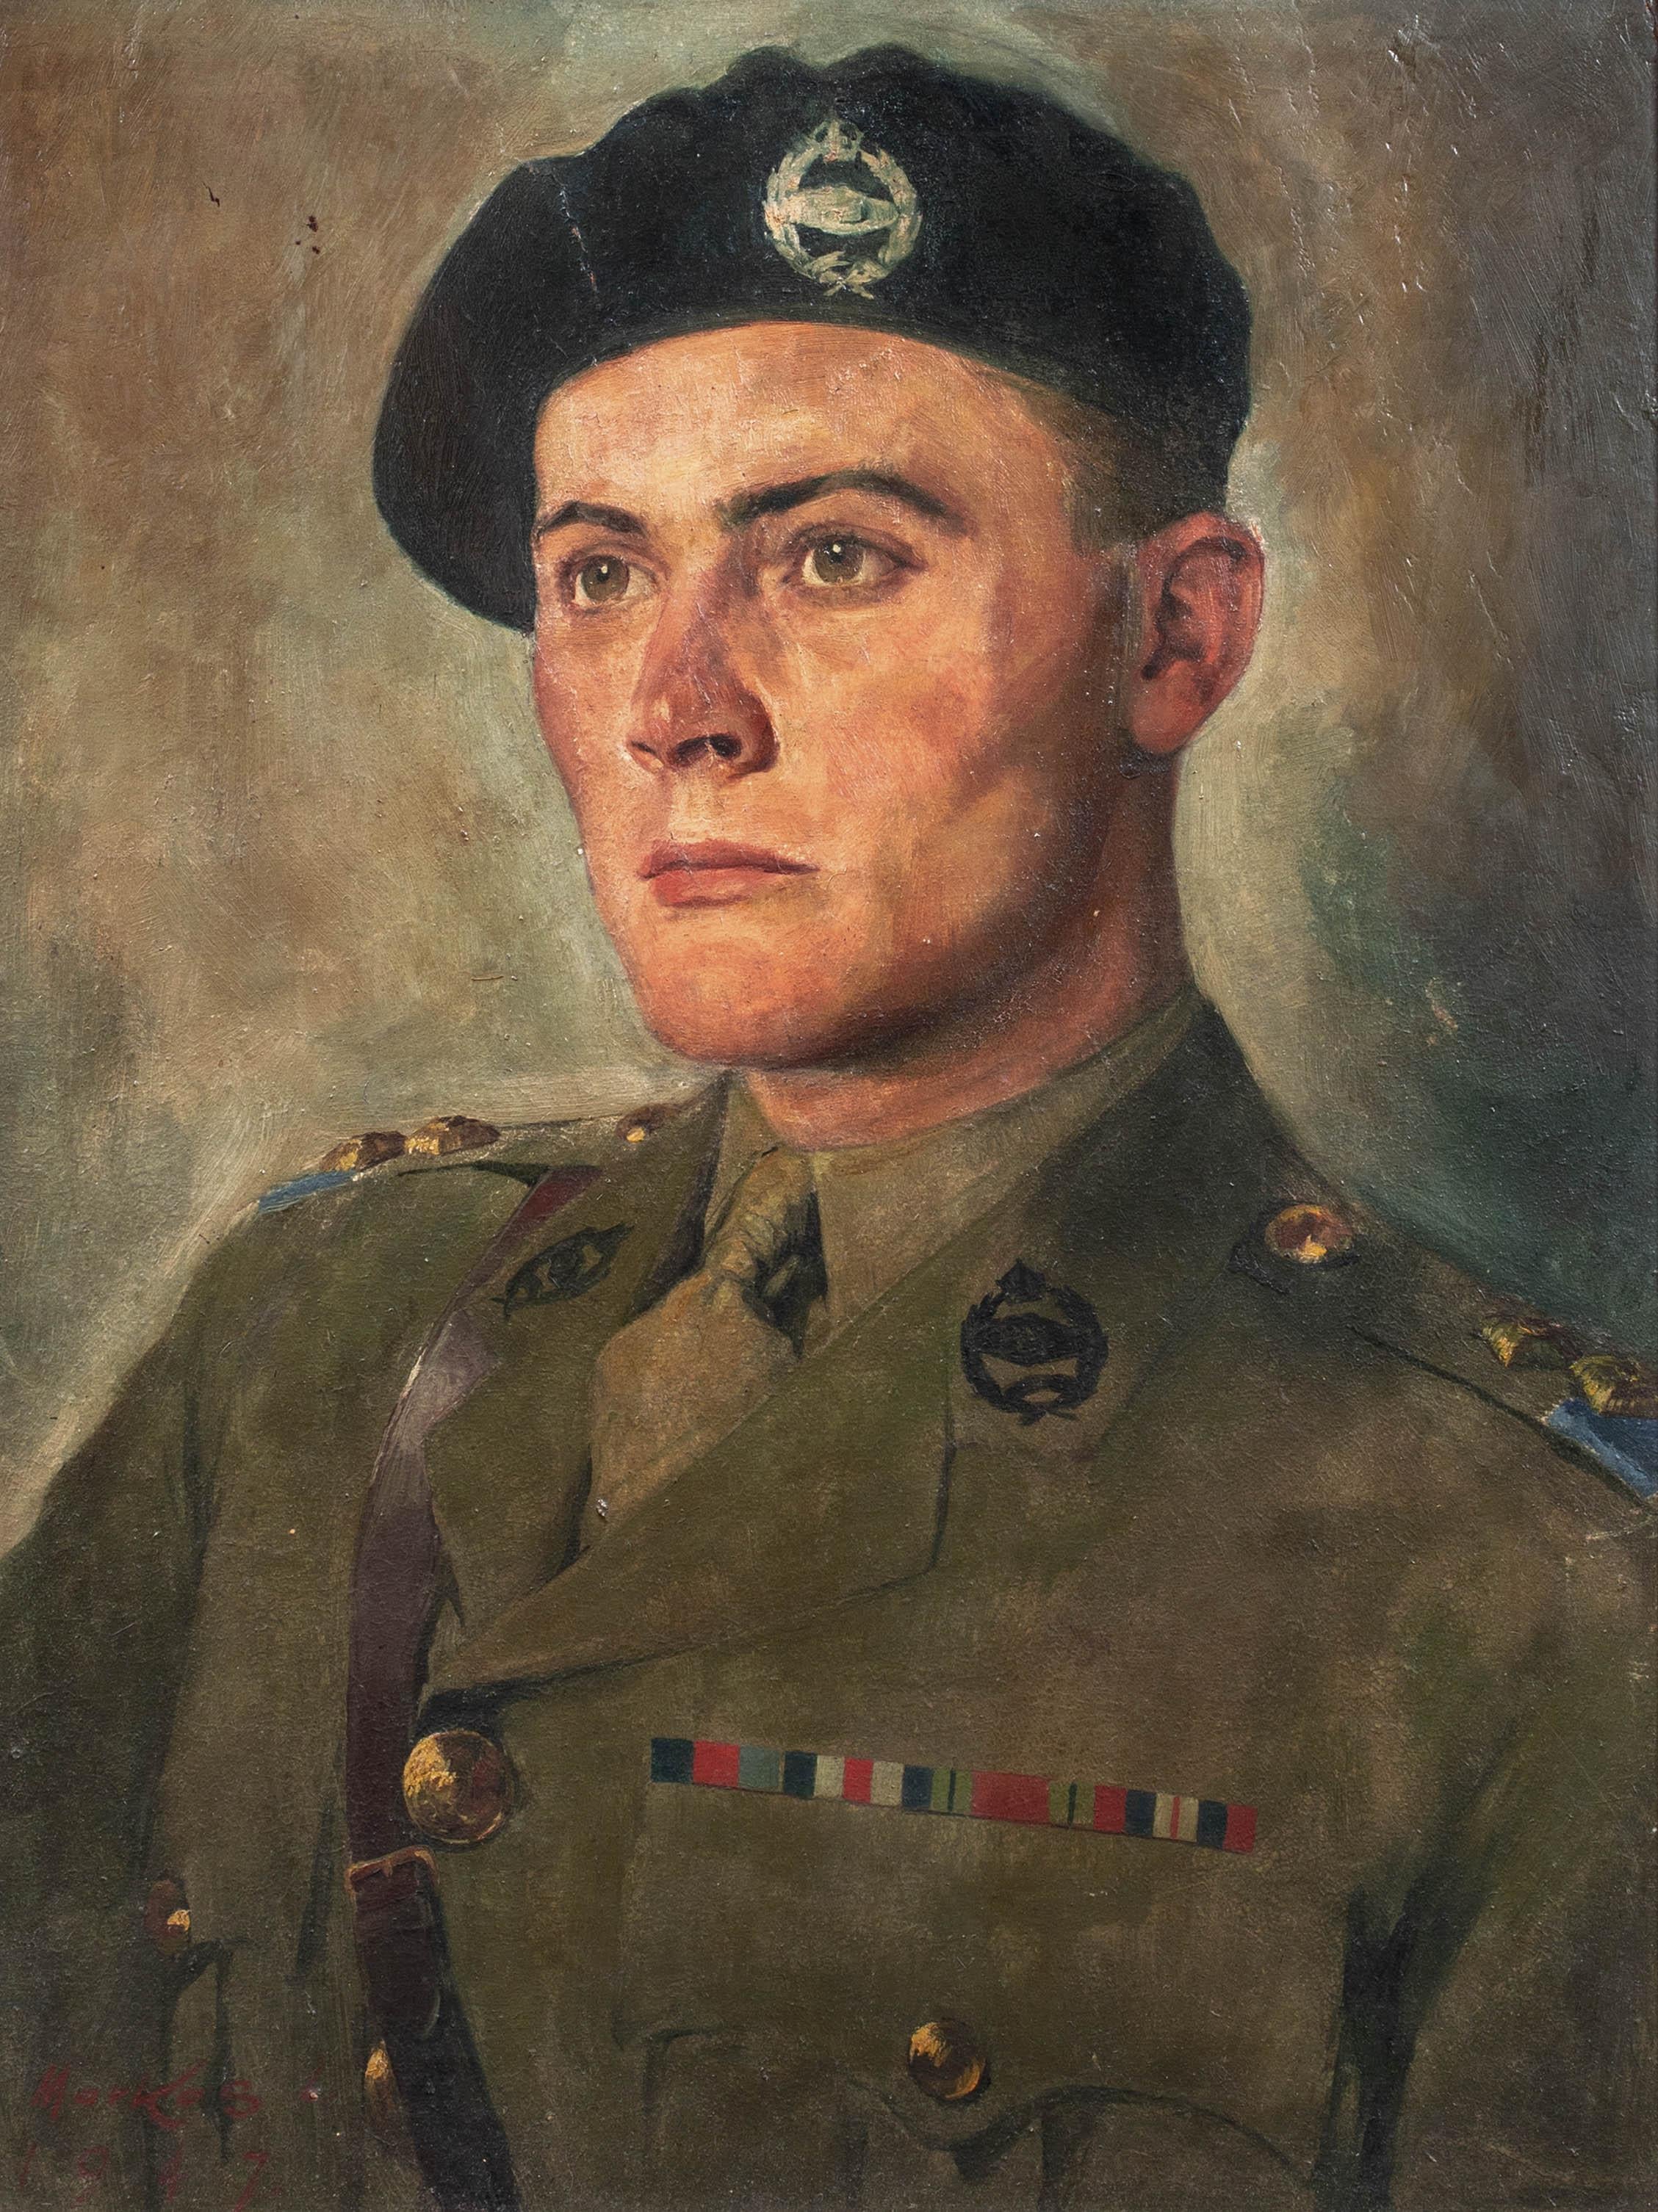 Portrait of A Tank Officer, circa 1940

WW2 - British School

circa 1940 British School portrait of a WW2 Tank regiment Lieutenant, oil on board, signed Markos. Good quality and condition rare portrait of an officer from the regiment, framed. Would